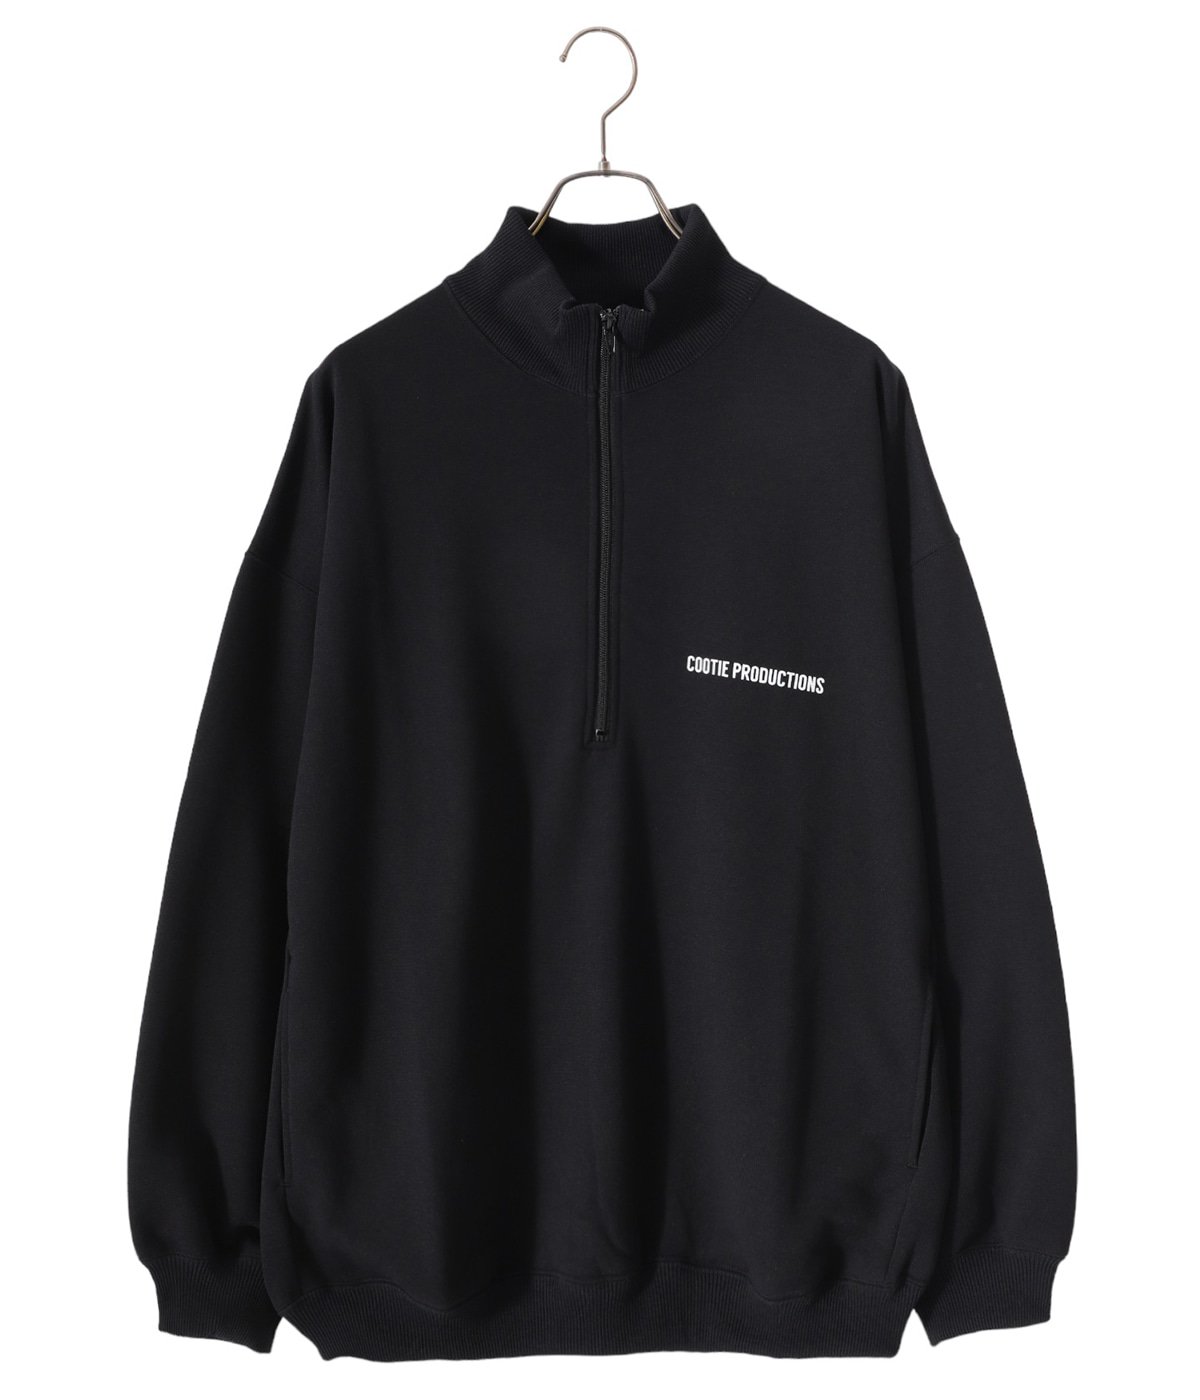 Dry Tech Sweat Half Zip Pullover | COOTIE PRODUCTIONS(クーティー